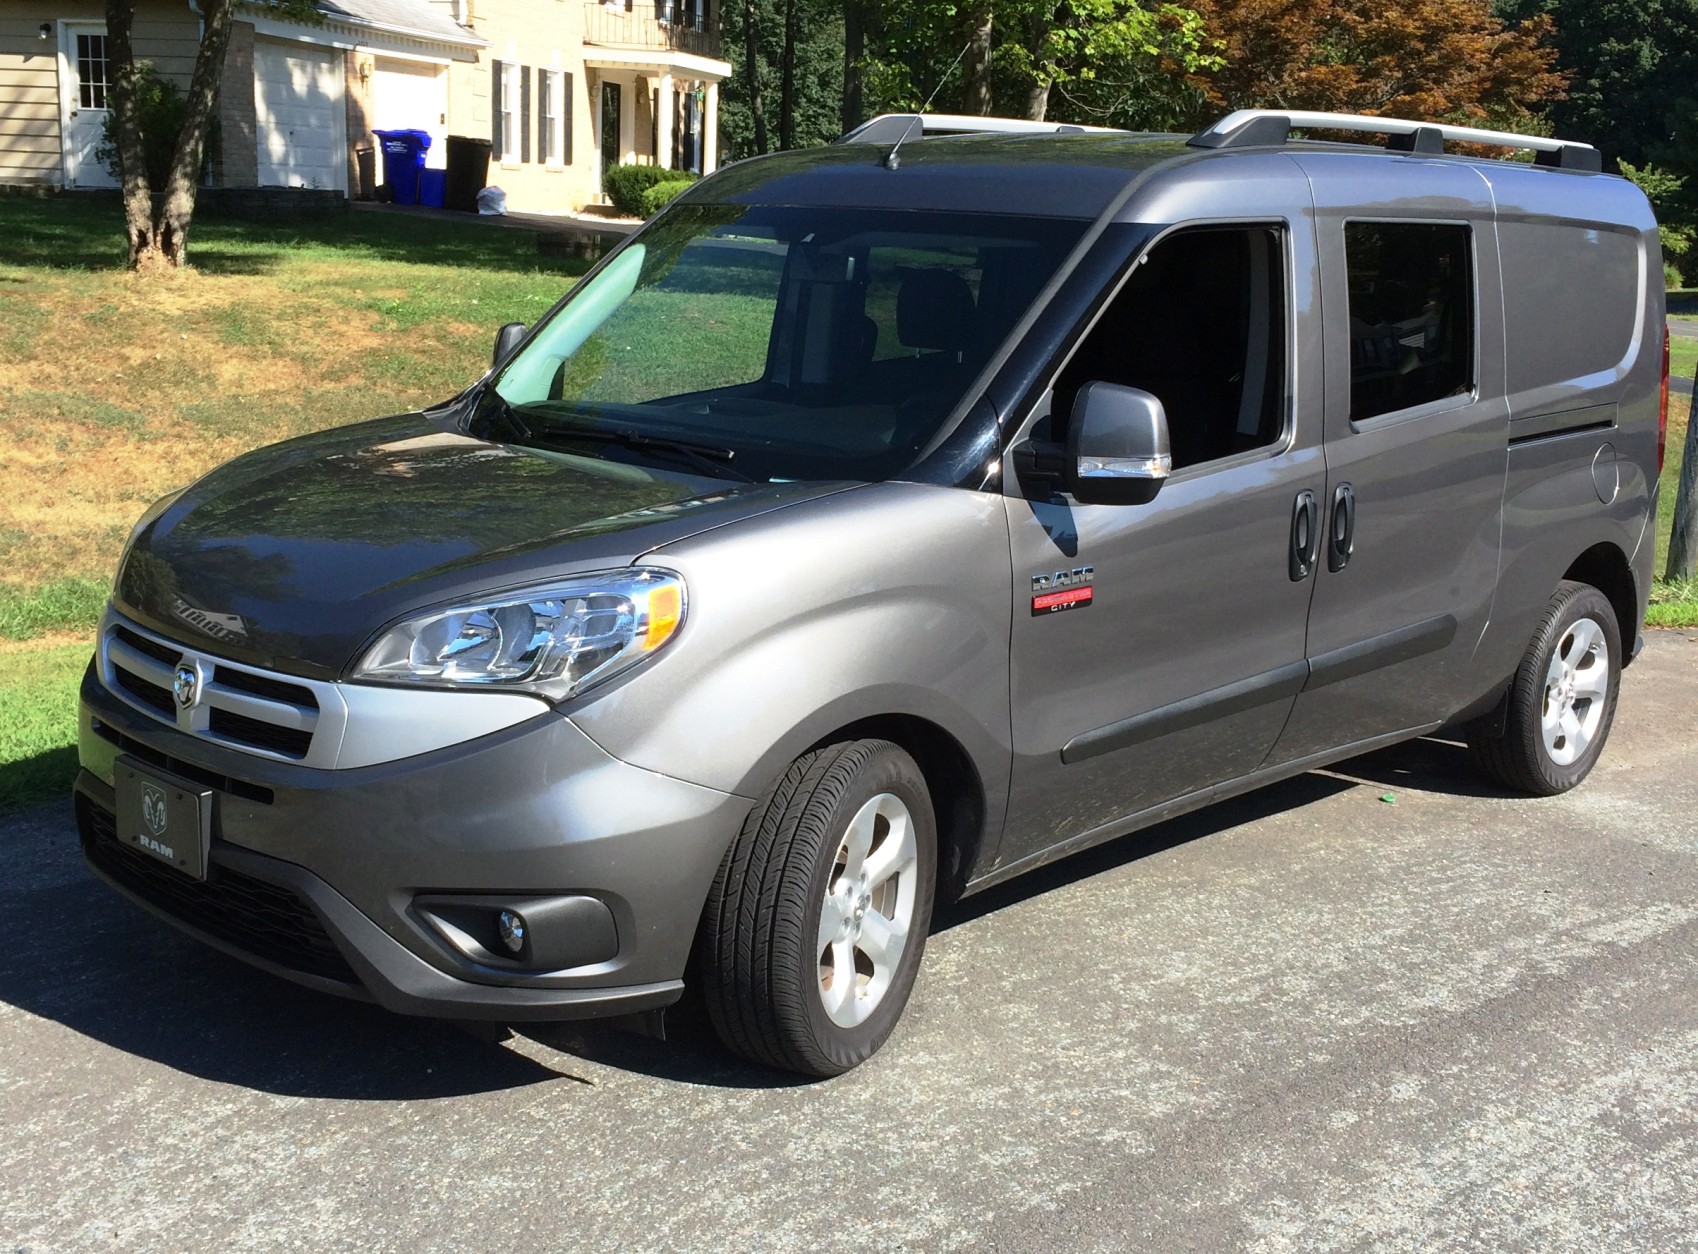 The Ram Promaster City Wagon is a utility player of the smaller cargo van. (WTOP/Mike Parris)